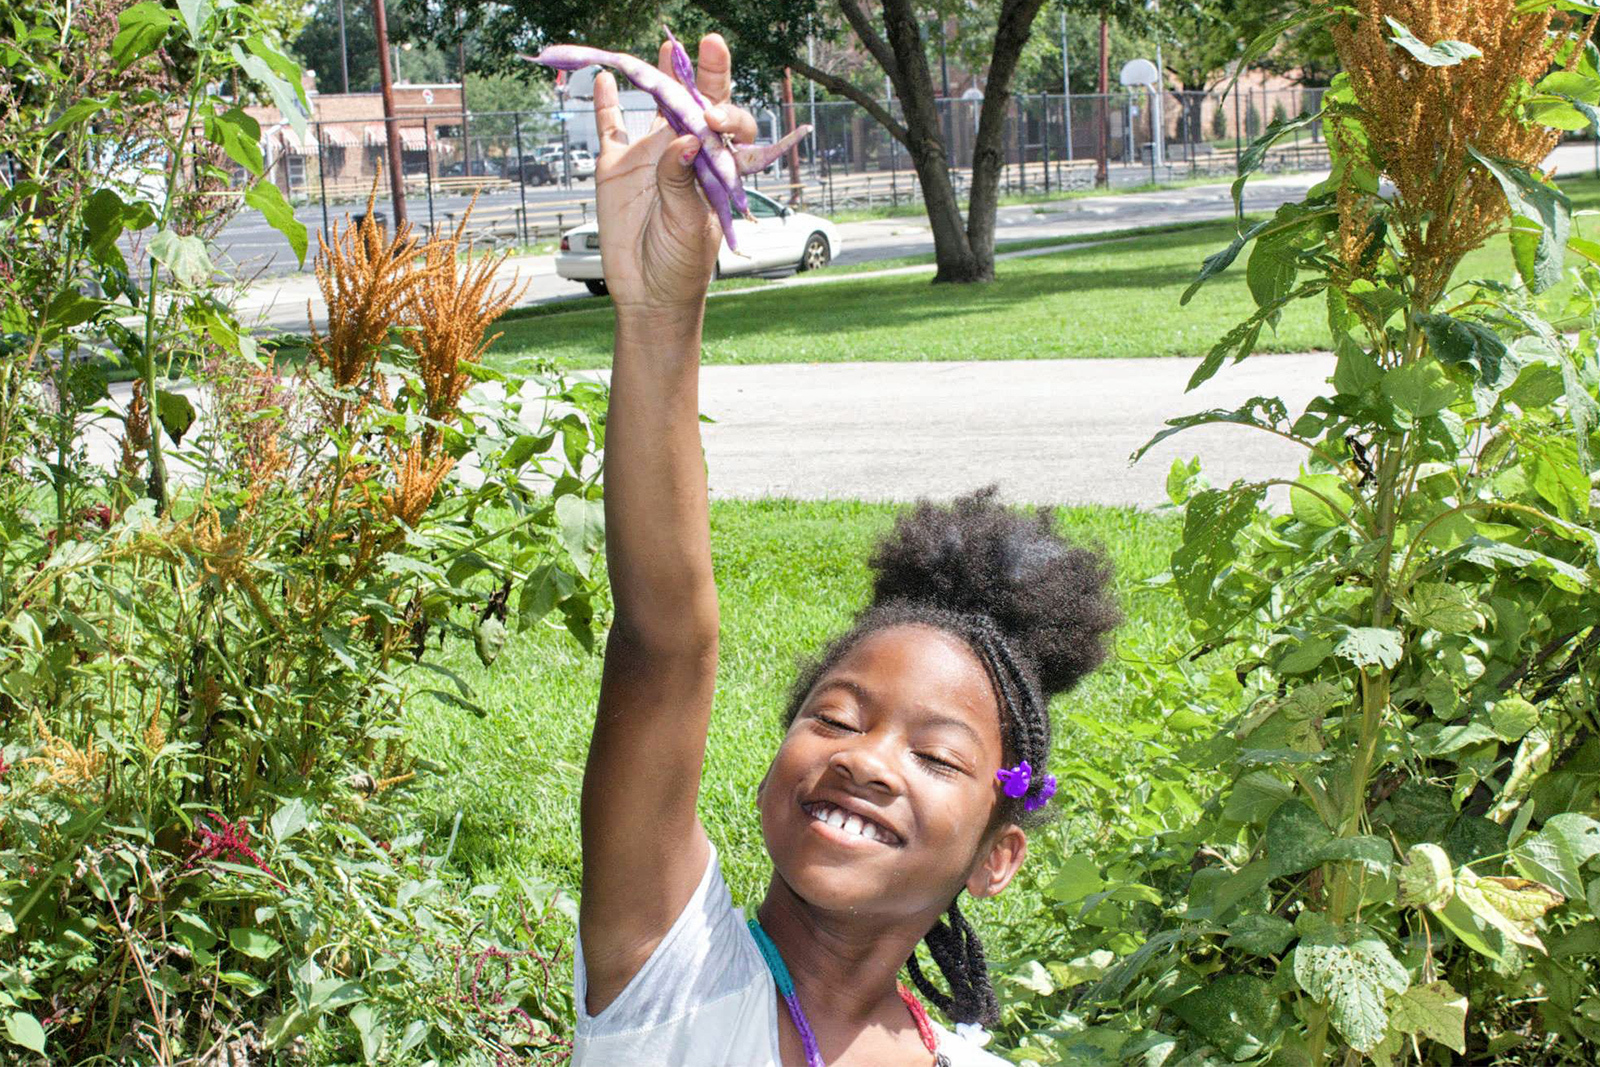 A young girl standing in a garden smiles wide holding up two purple beans